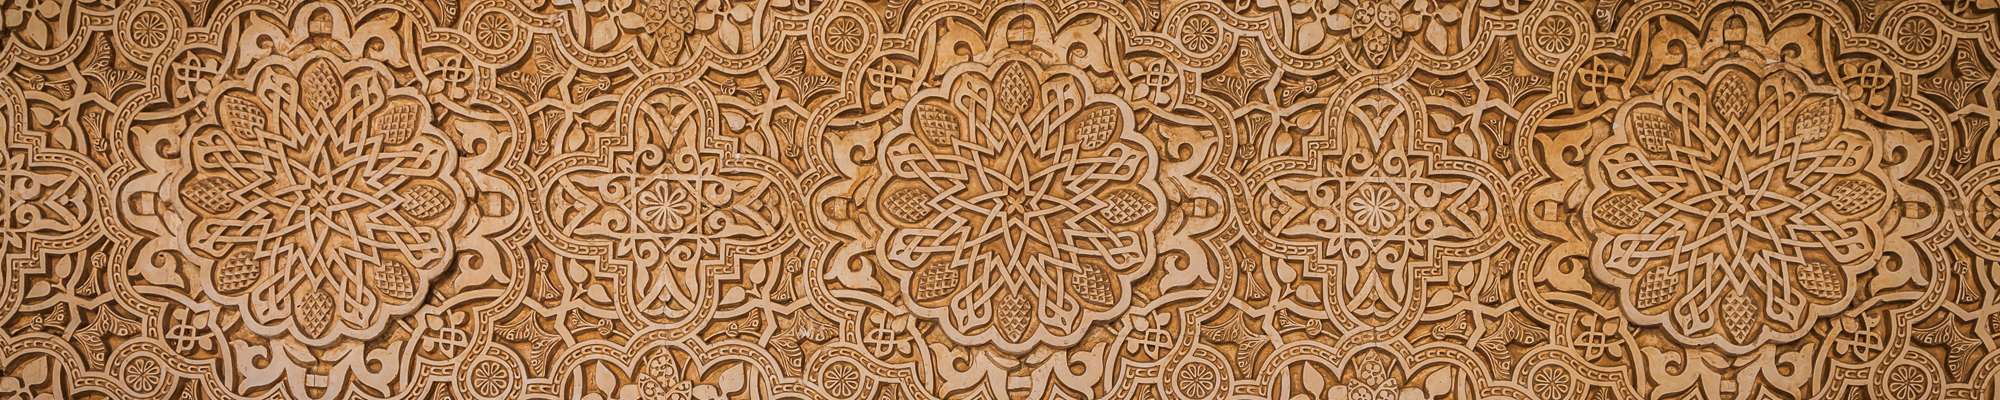 architectural detail of Arabic characters